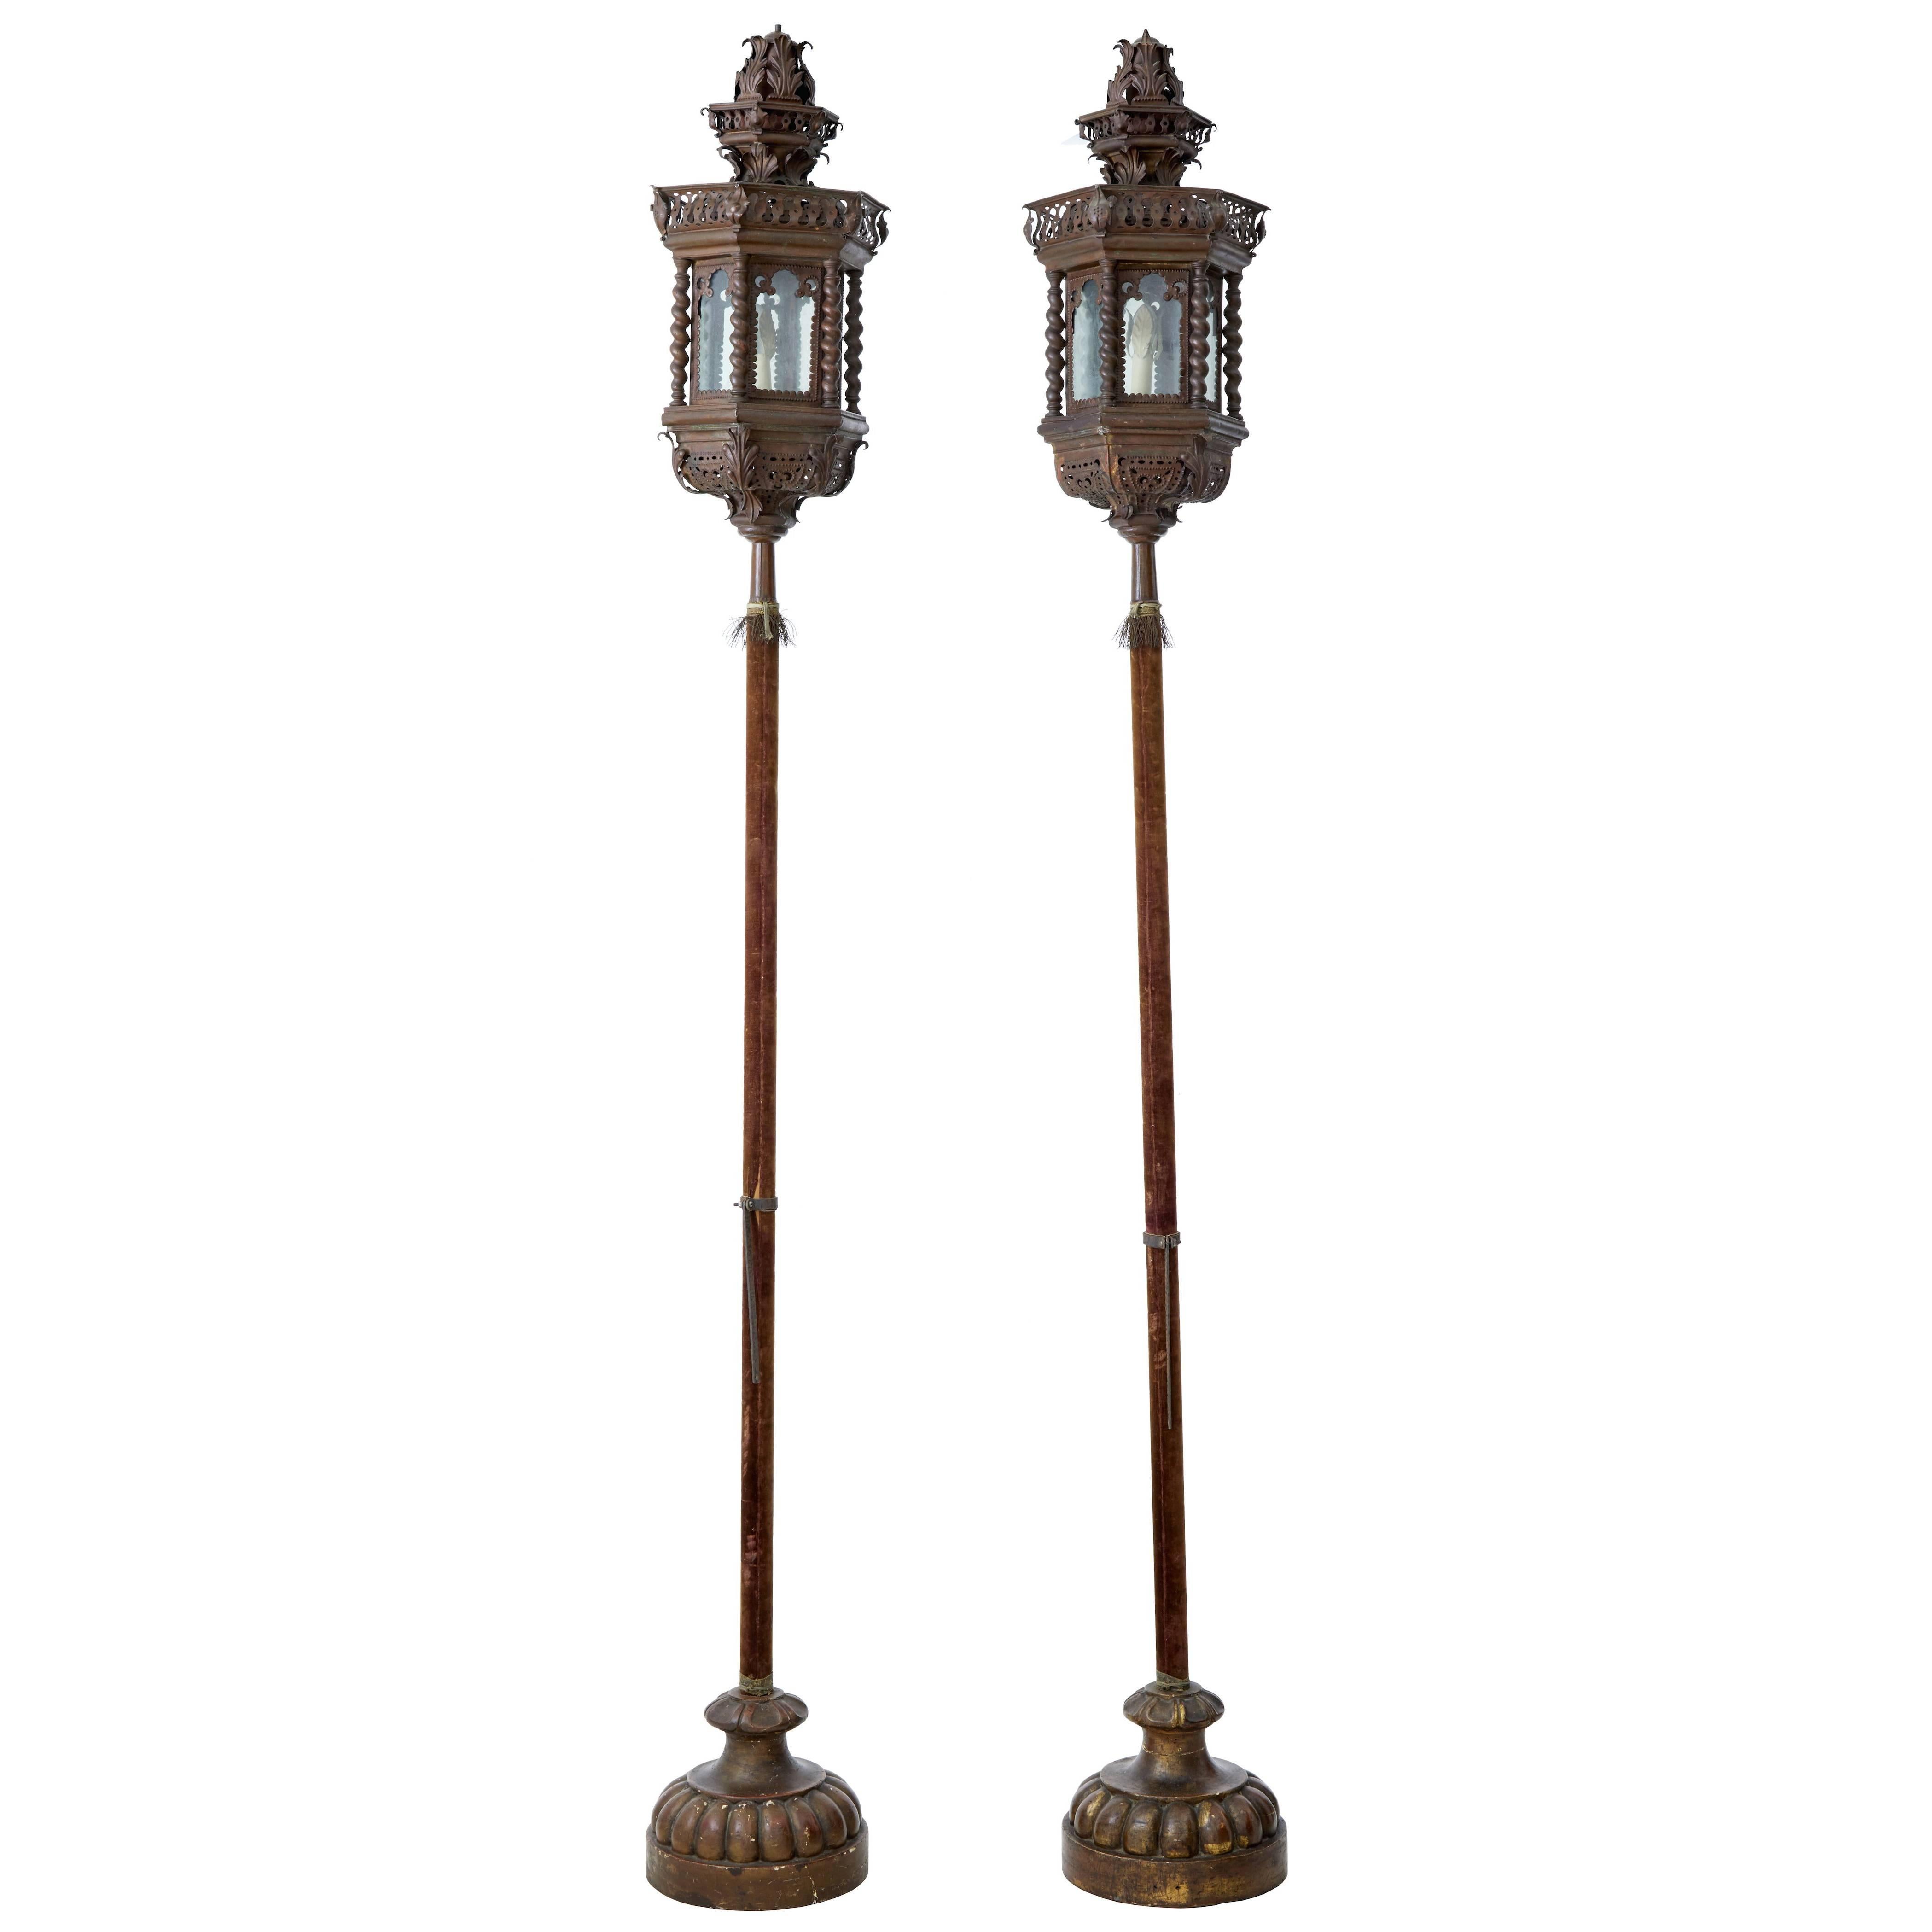 Pair of Early 20th Century Copper Venetian Lamps on Poles